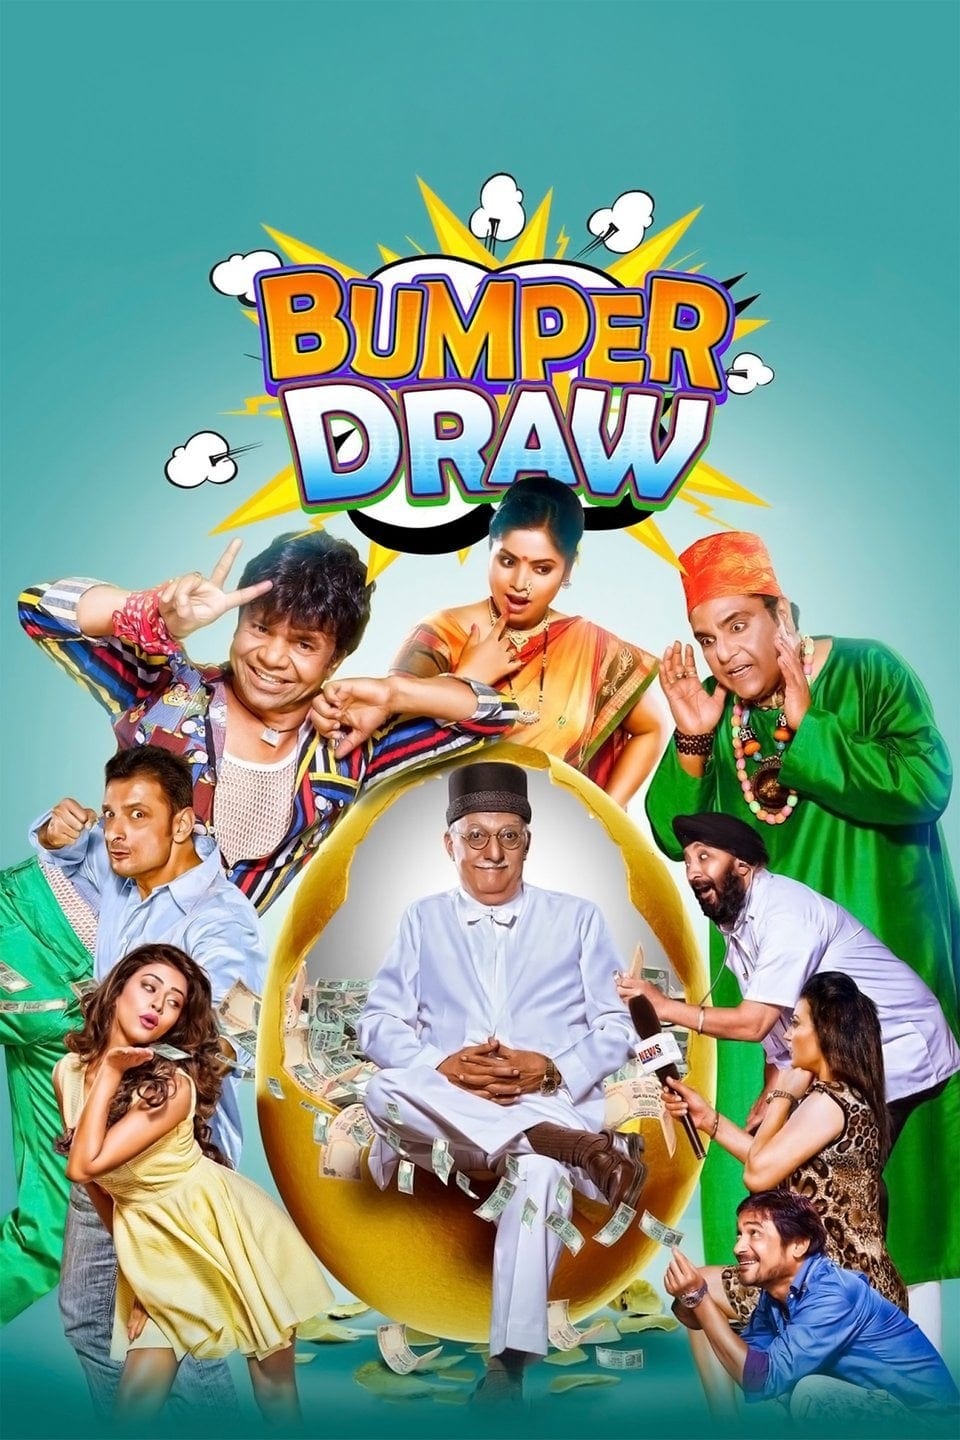 Poster for the movie "Bumper Draw"